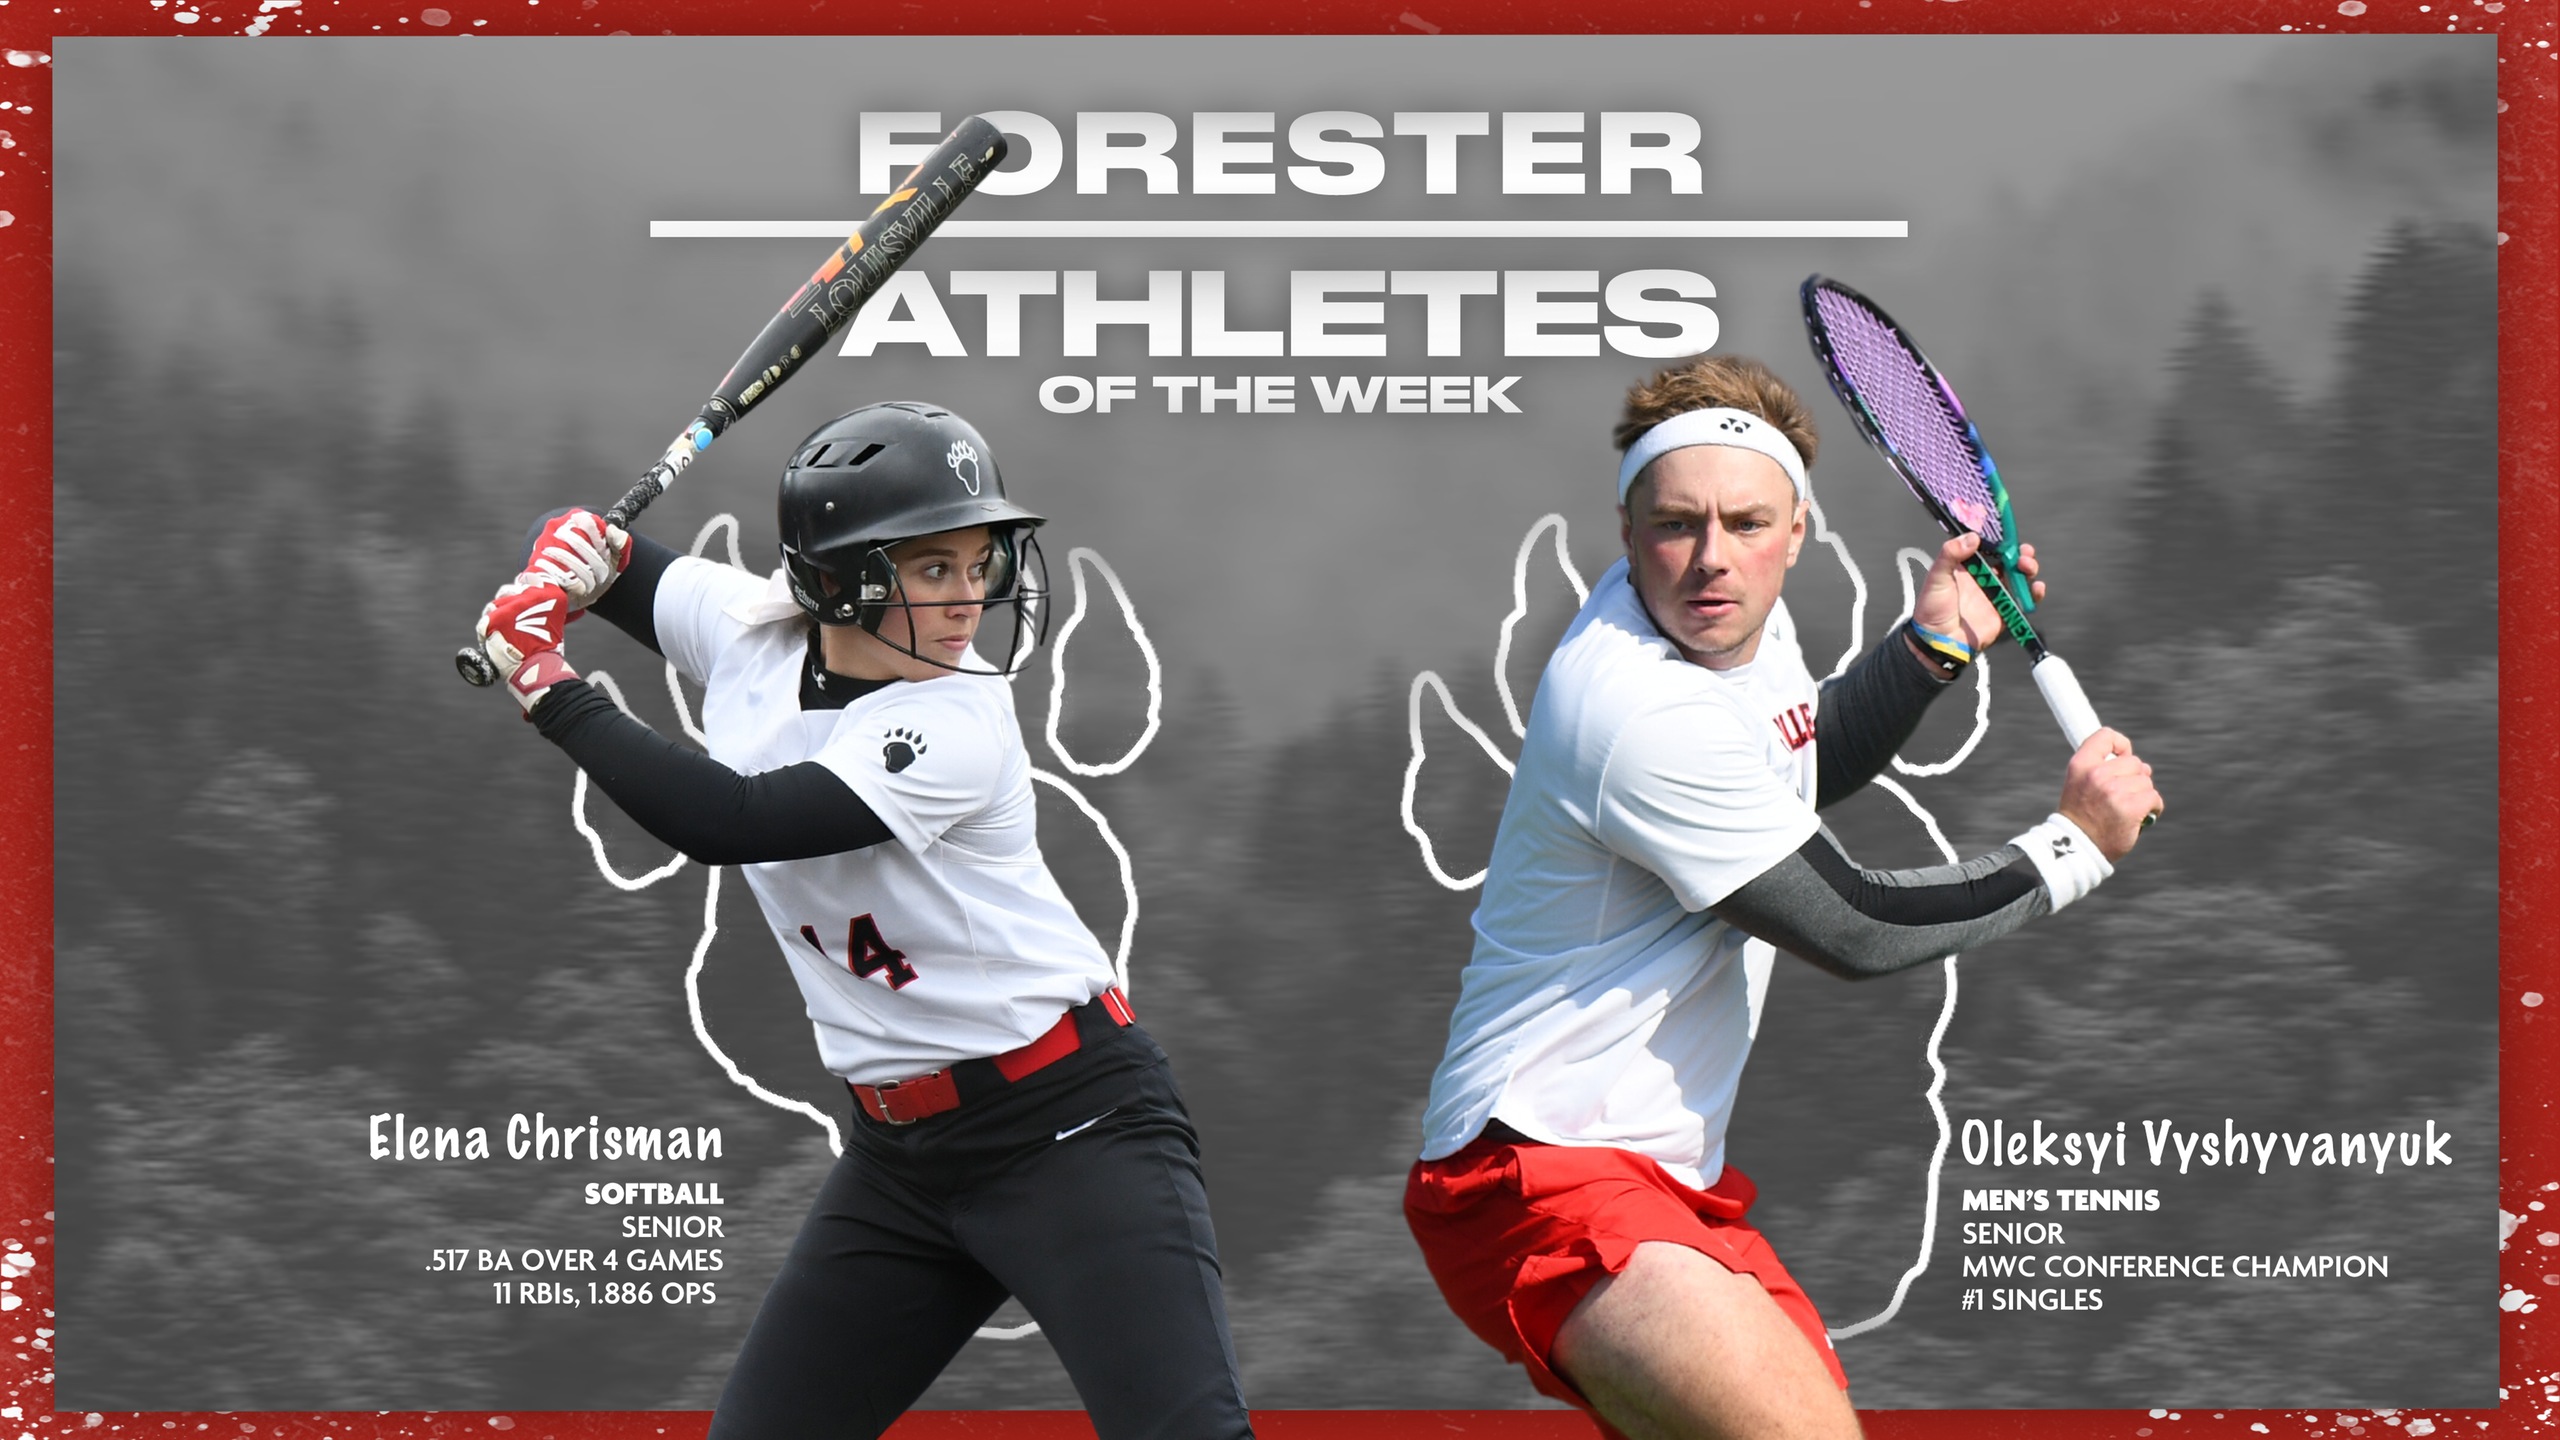 Forester Athletes of the Week: May 2